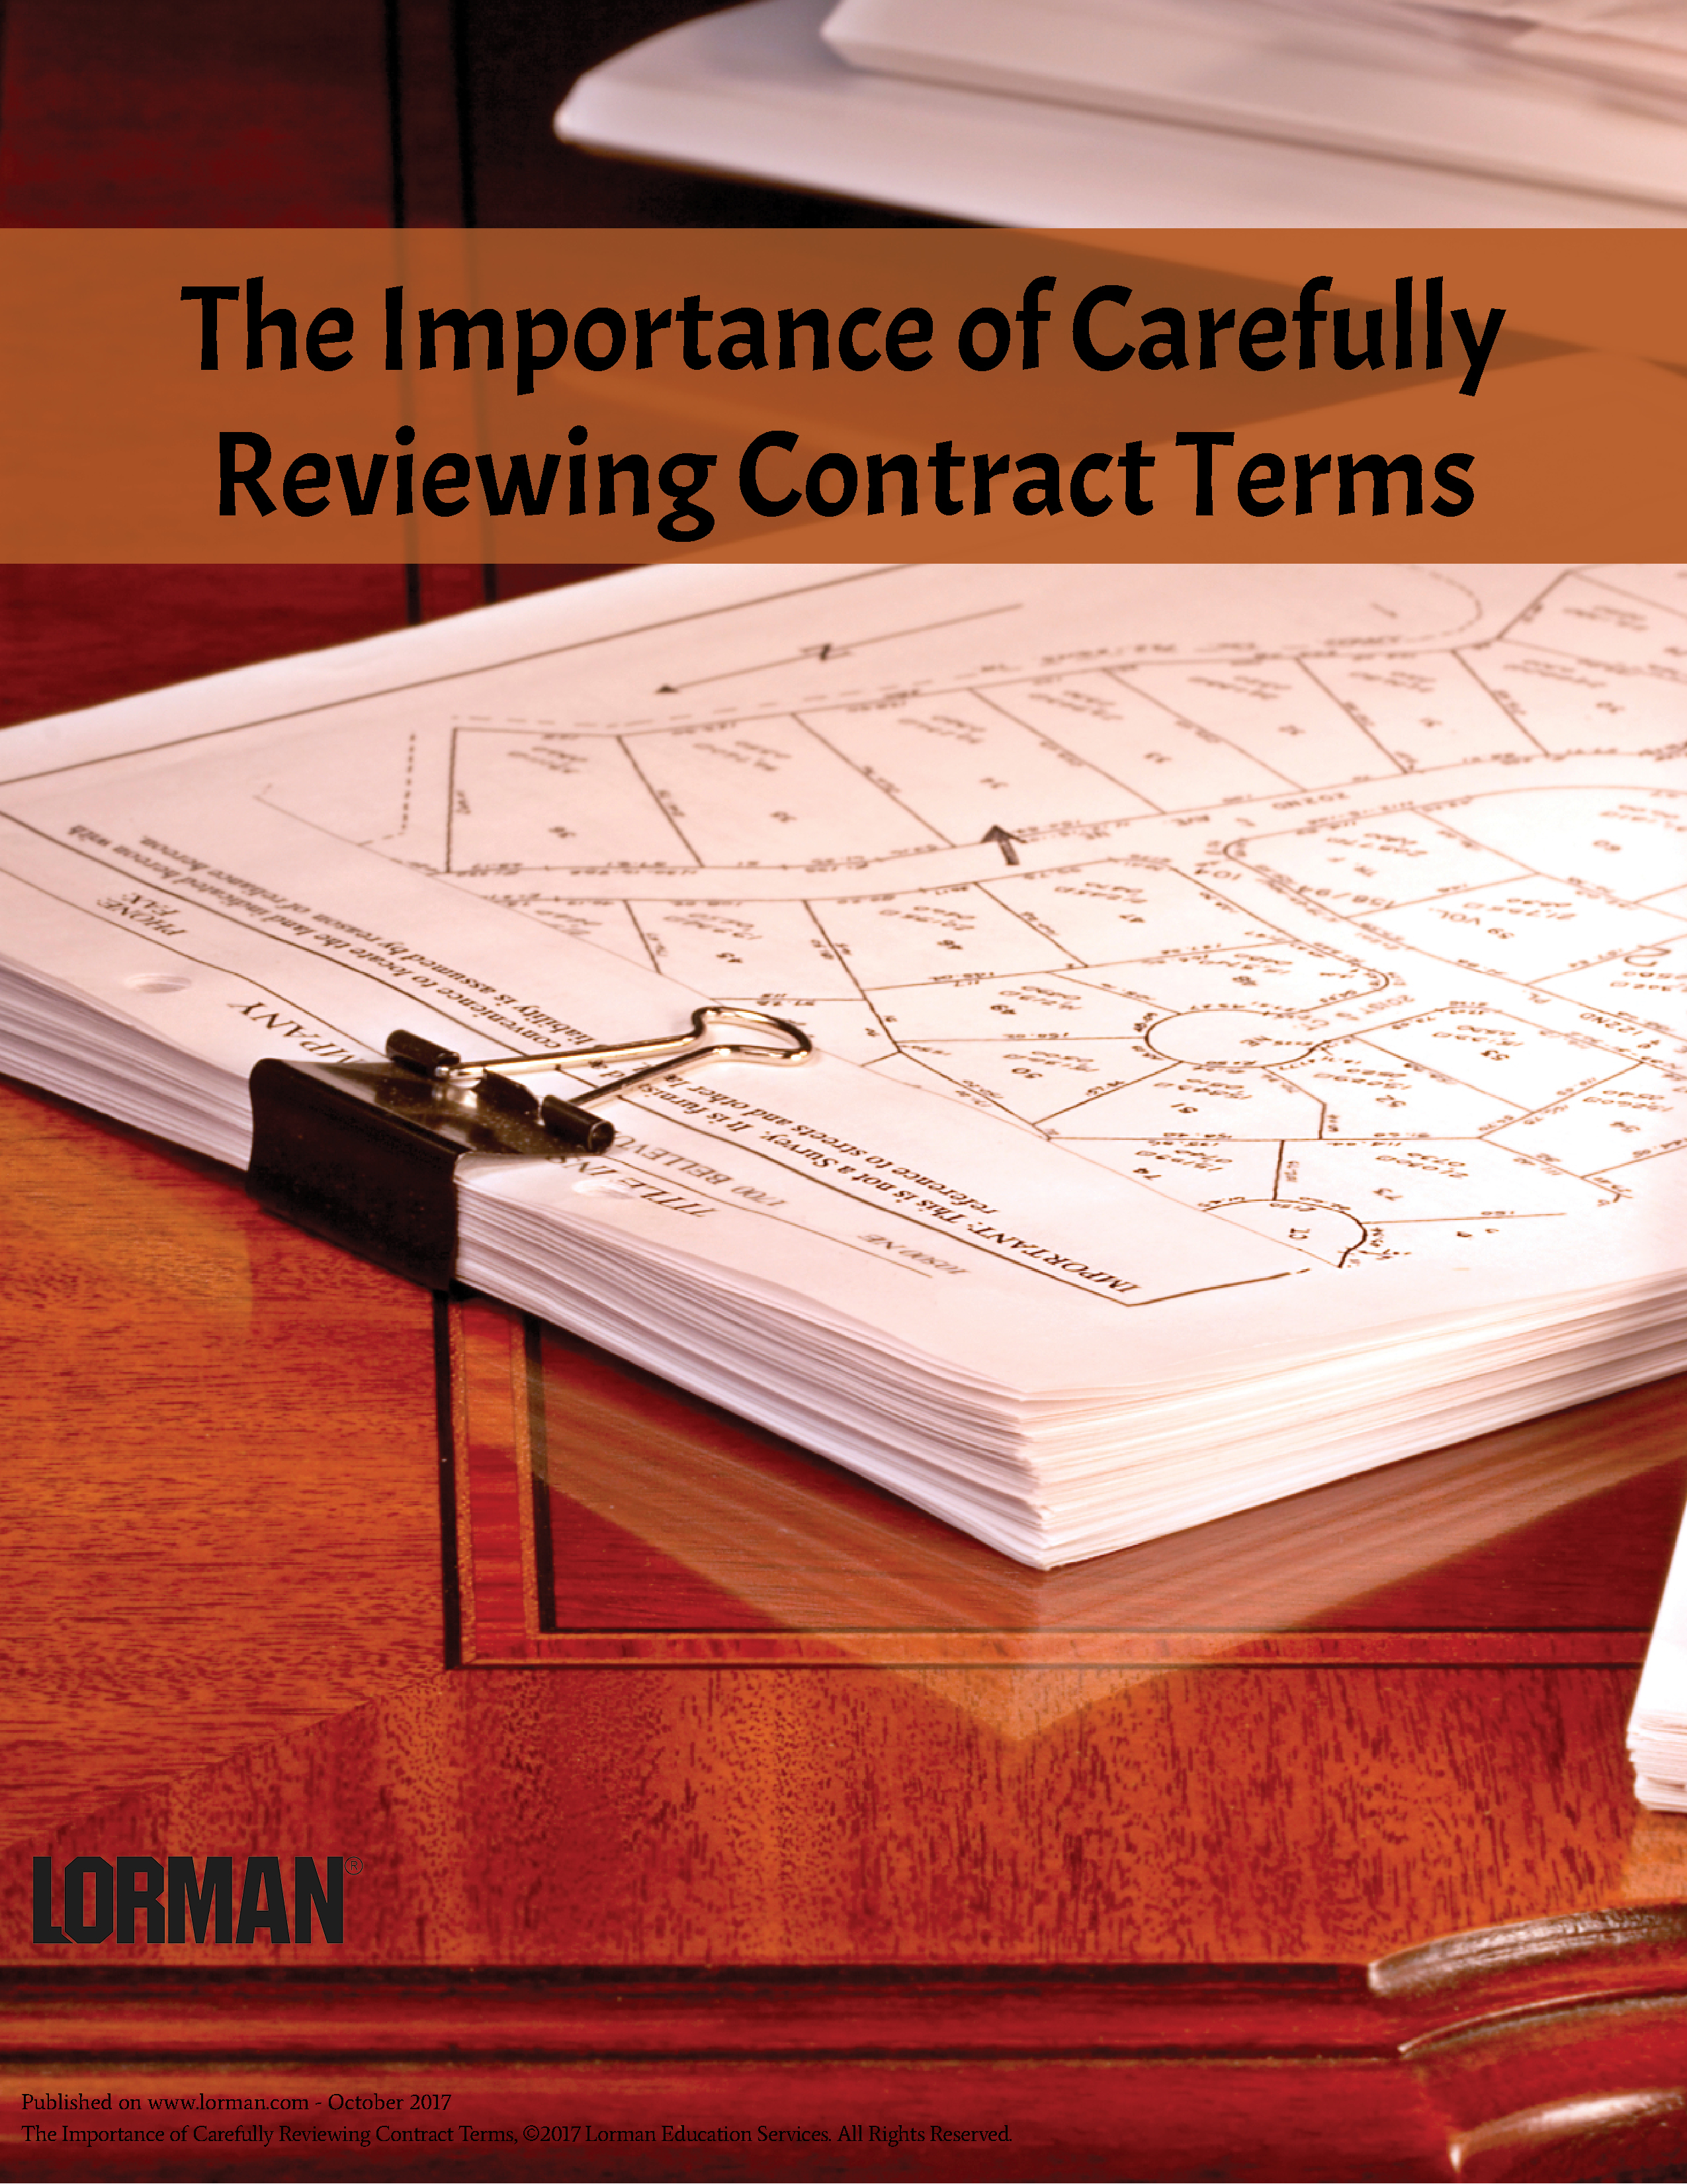 The Importance of Carefully Reviewing Contract Terms